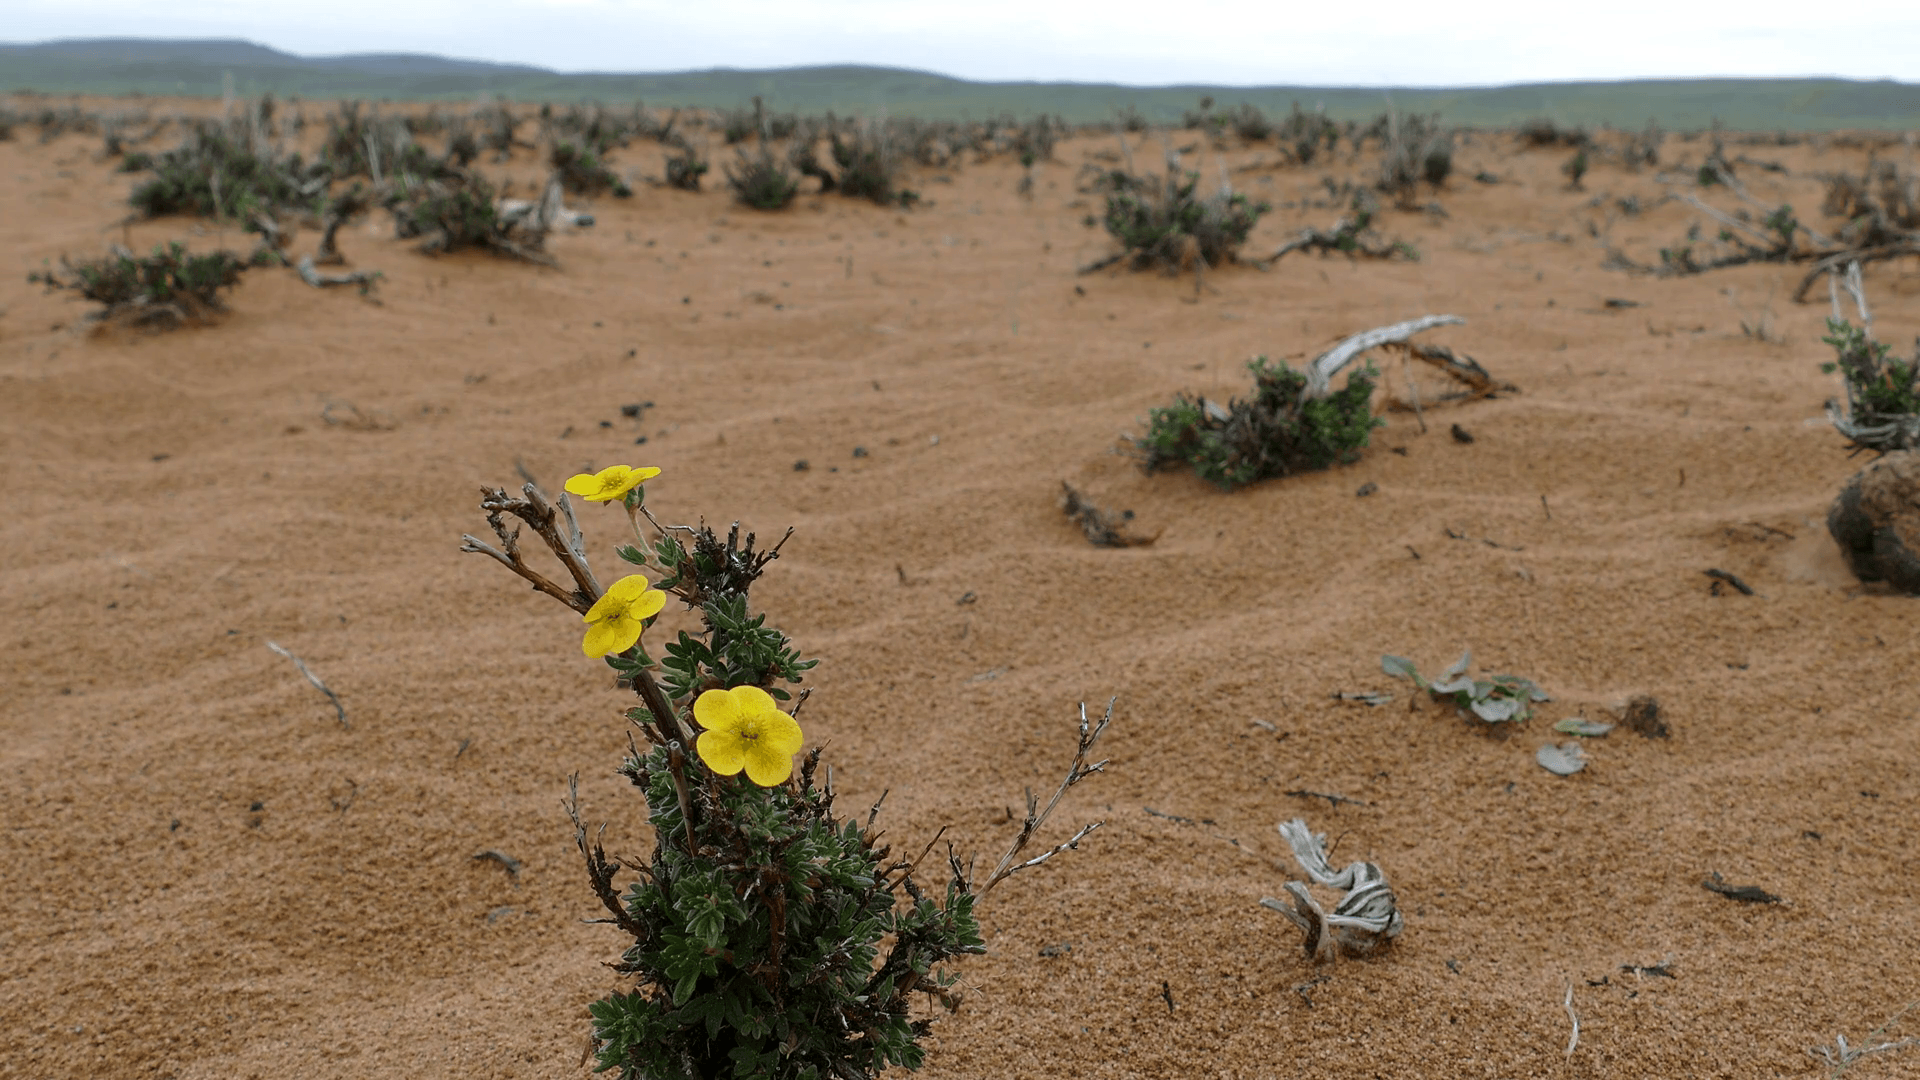 Sandy steppe, covered with small bushes of plants shrubby cinquefoil